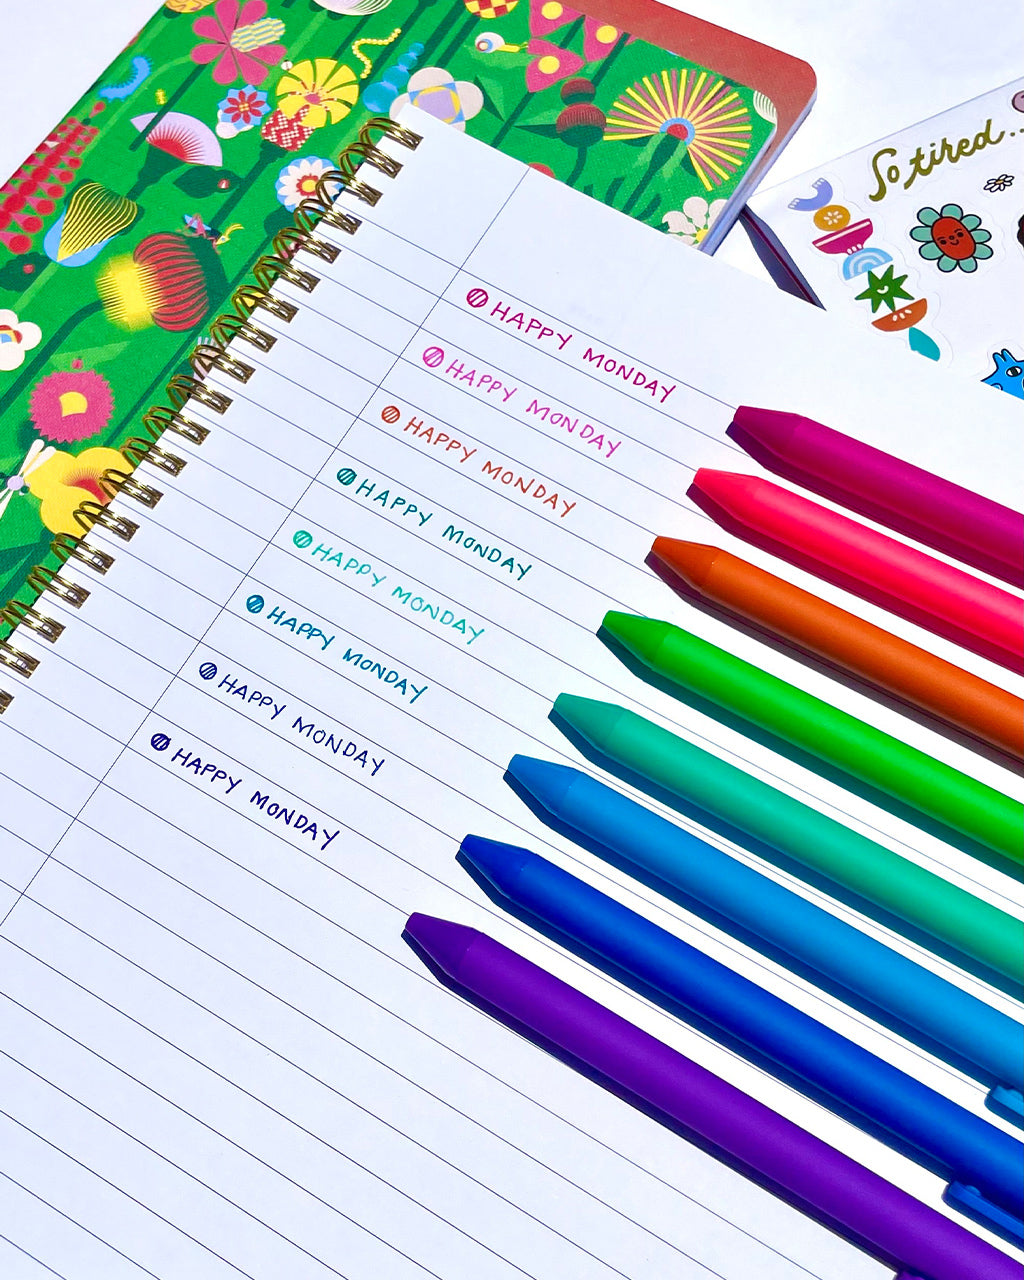 Talking Out of Turn Jotter Sets - 6 pack: What Day Is It?